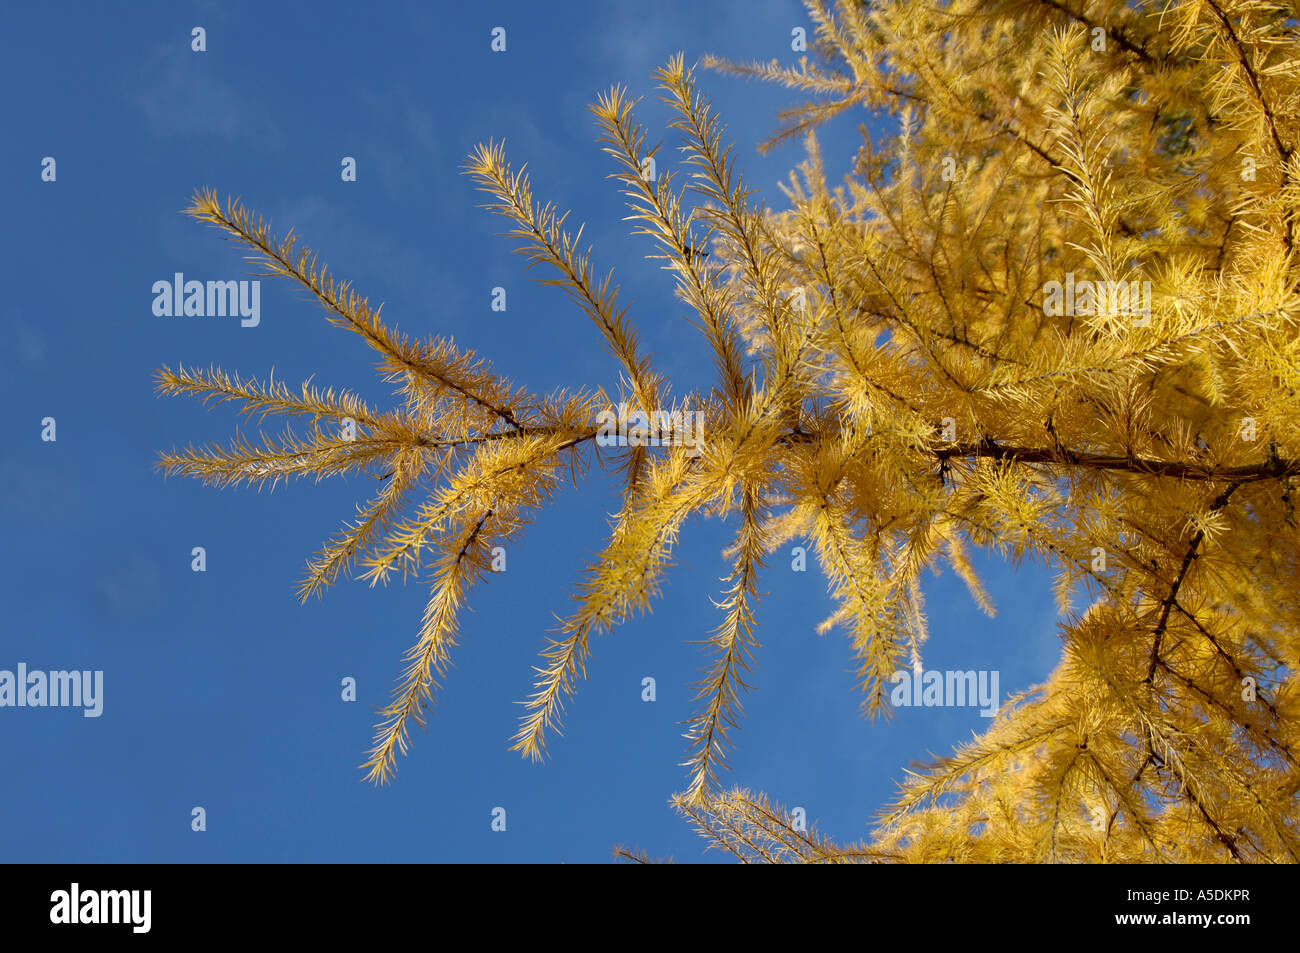 Larch species Larix sp showing needles in autumn gold colour Stock Photo